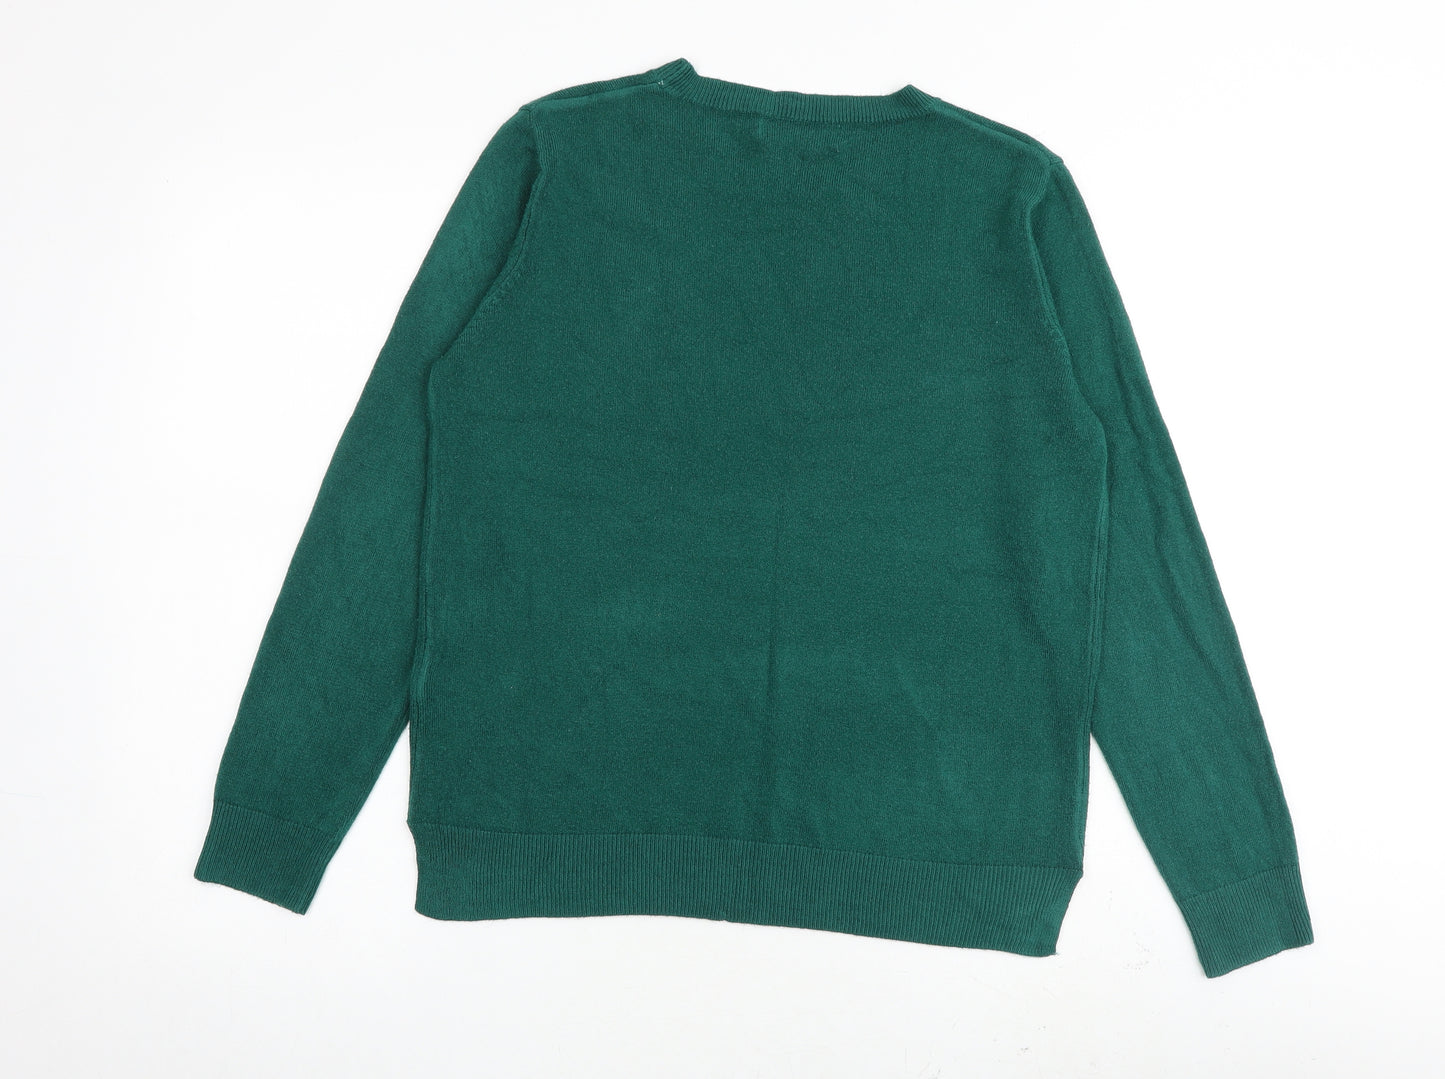 Marks and Spencer Womens Green Crew Neck Acrylic Pullover Jumper Size 14